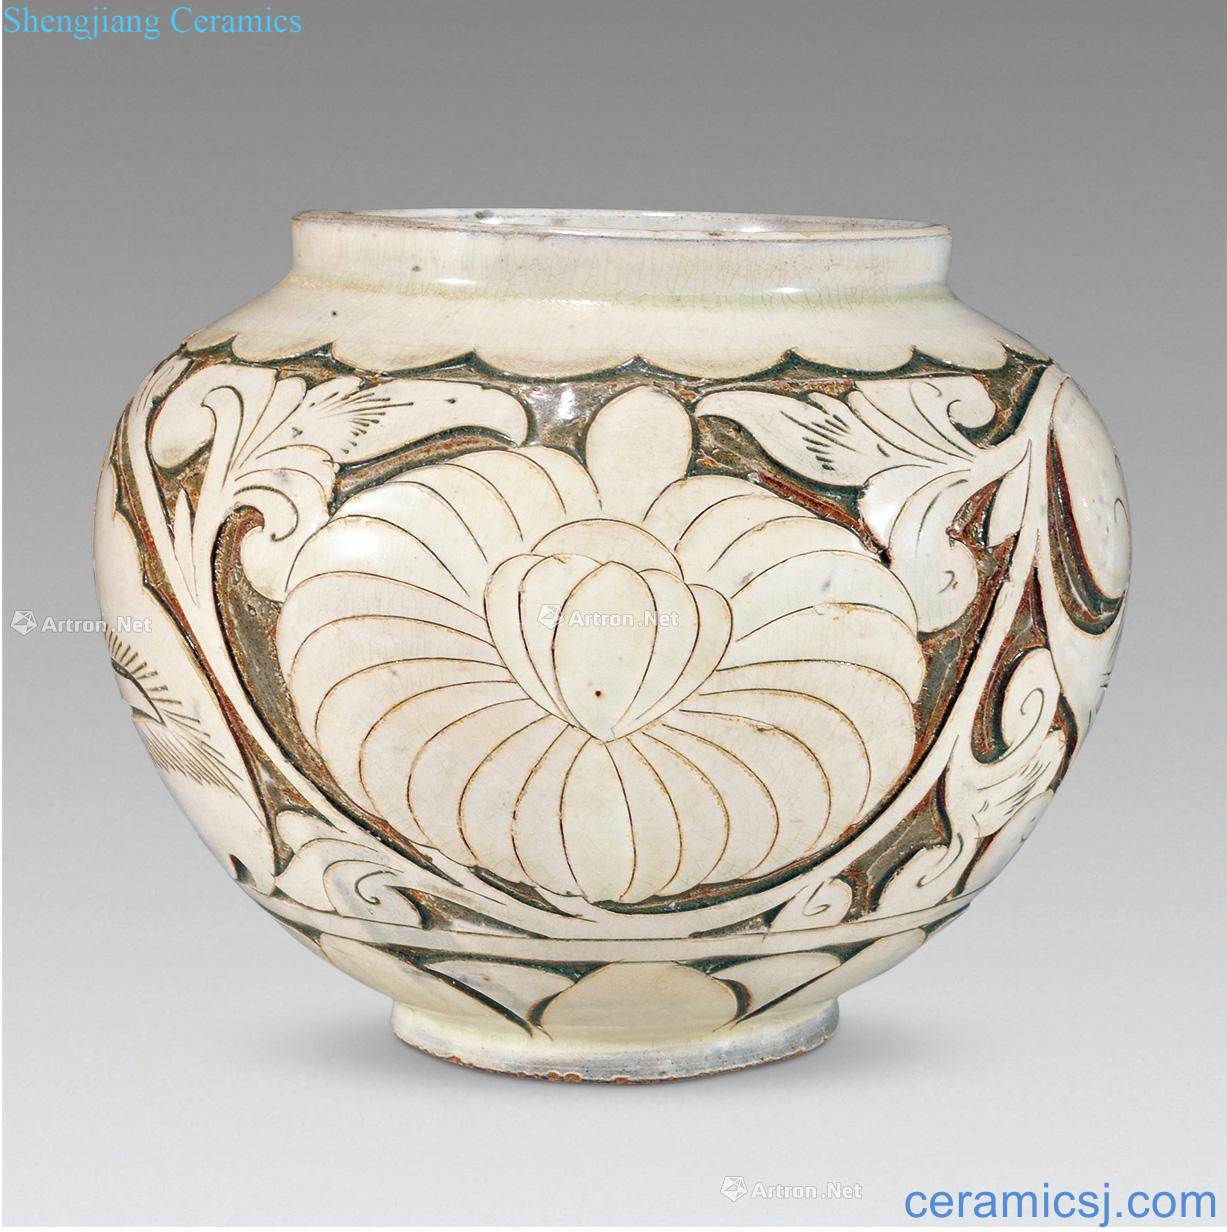 Song magnetic state kiln carved flower peony cans